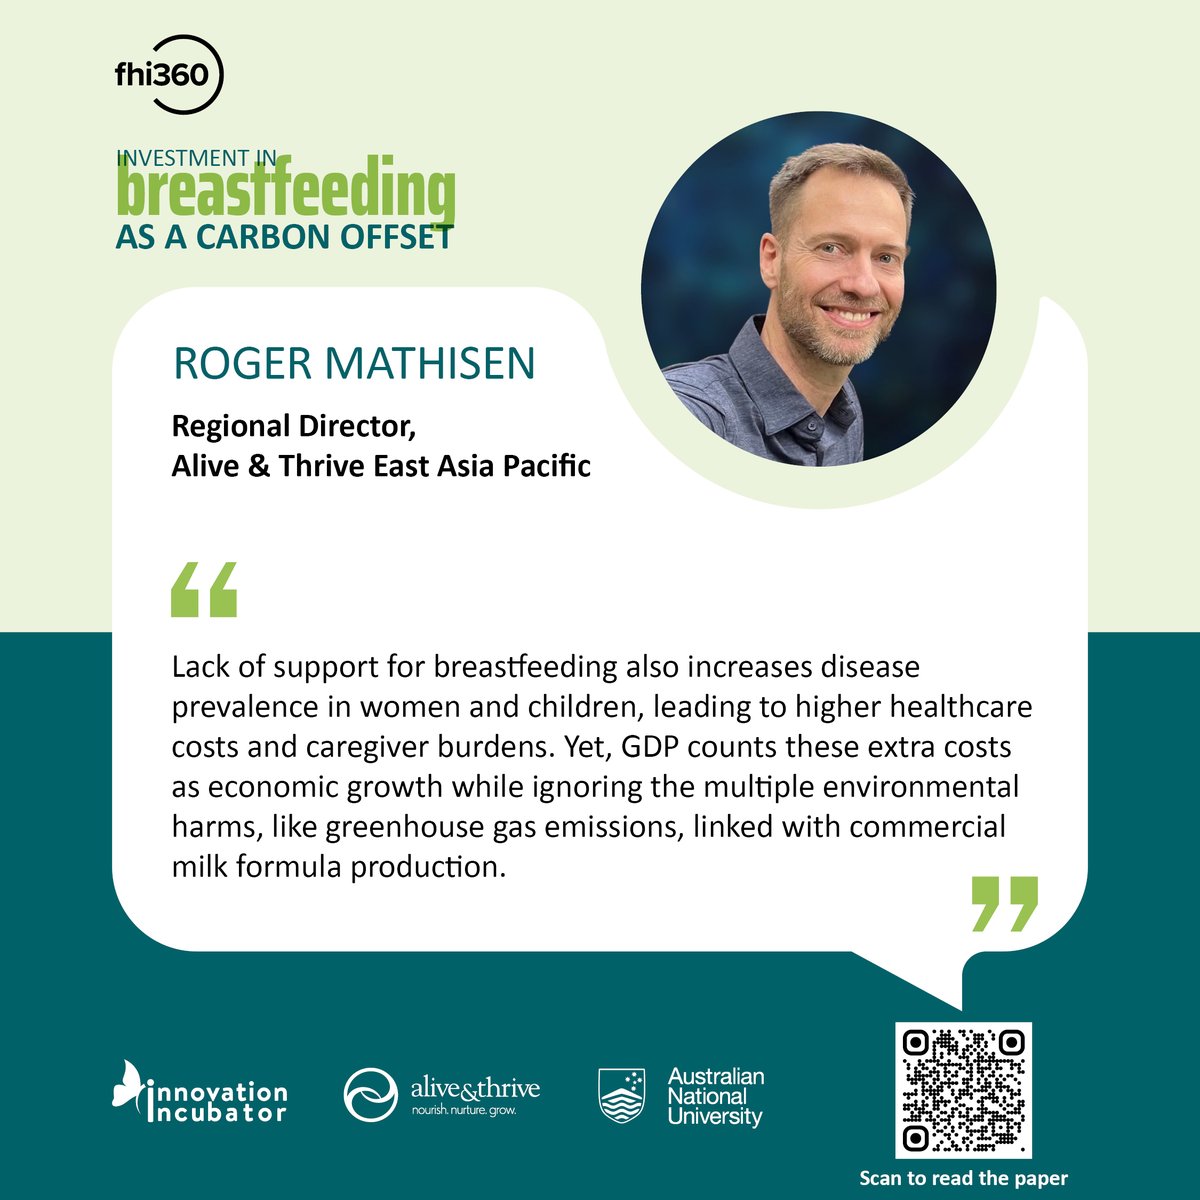 Breastfeeding should be celebrated and supported as a sustainable, local, and healthy first-food system for generations to come. It's time to value what truly matters. @MathisenRoger bit.ly/Breastfeedinga… #BreastfeedingasCarbonOffset #MothersDay